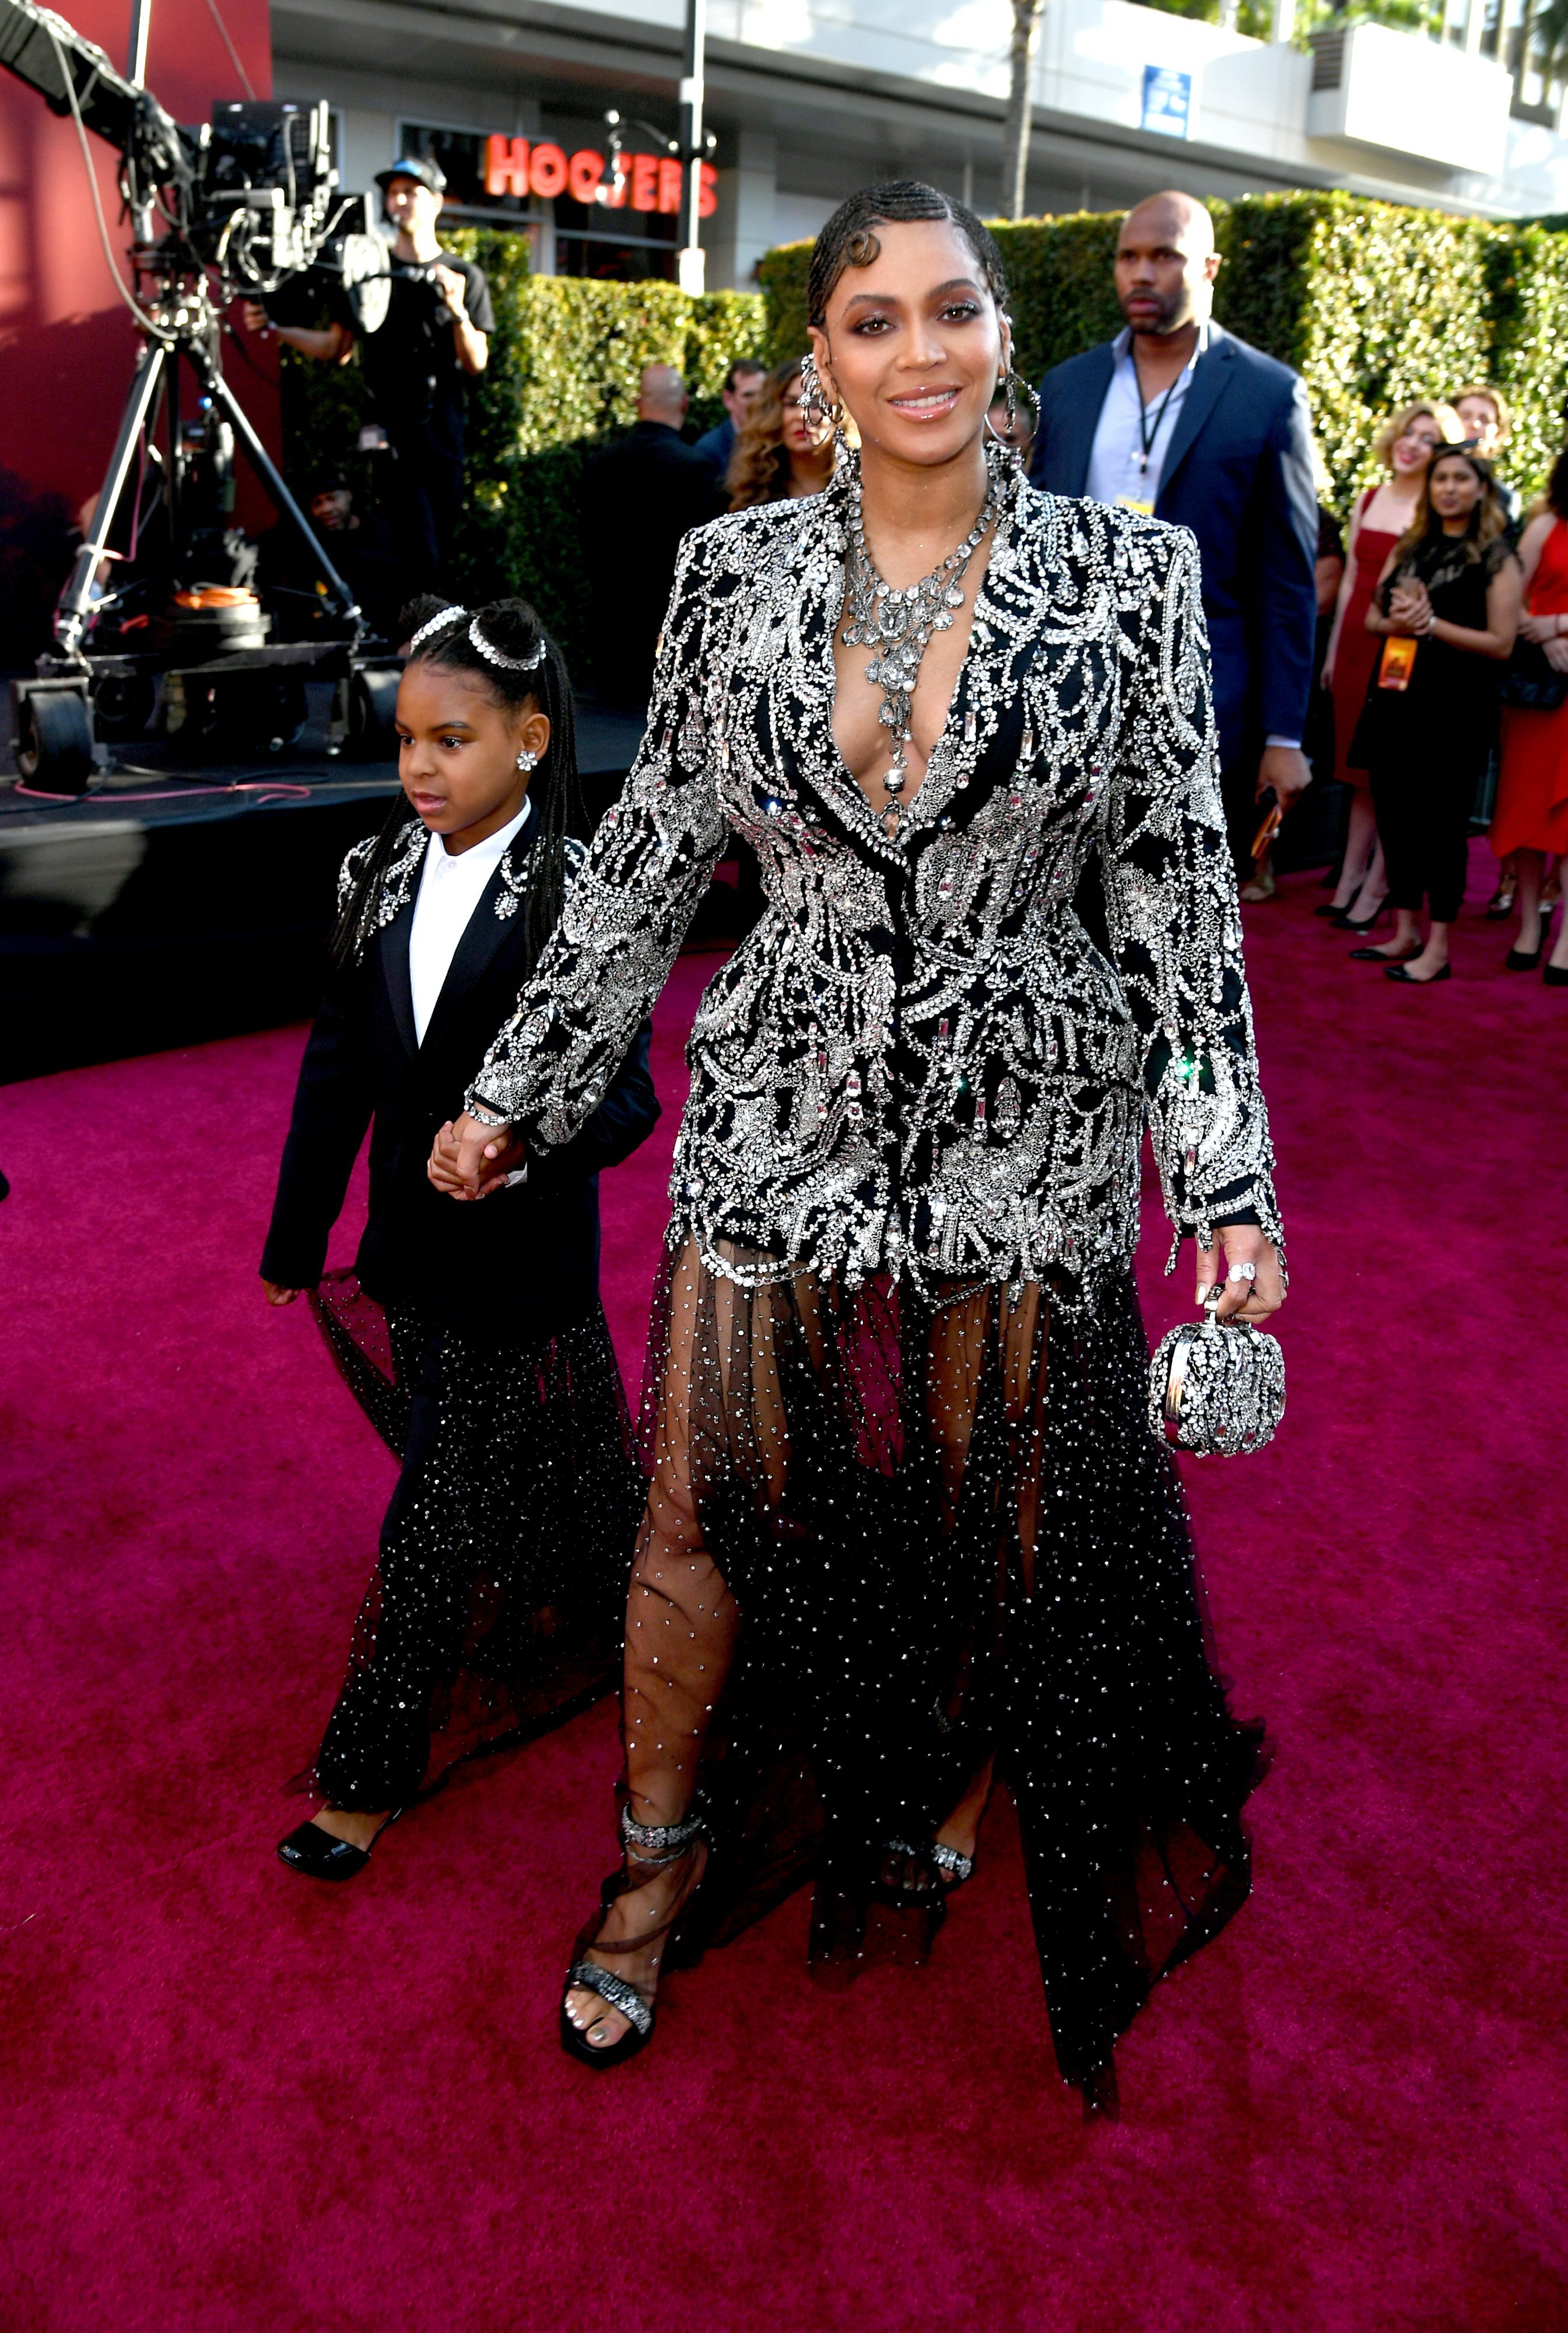 Beyonce attends the Hollywood premiere of "The Lion King" with her daughter, Blue Ivy Carter in July 2019. | Source: Getty Images